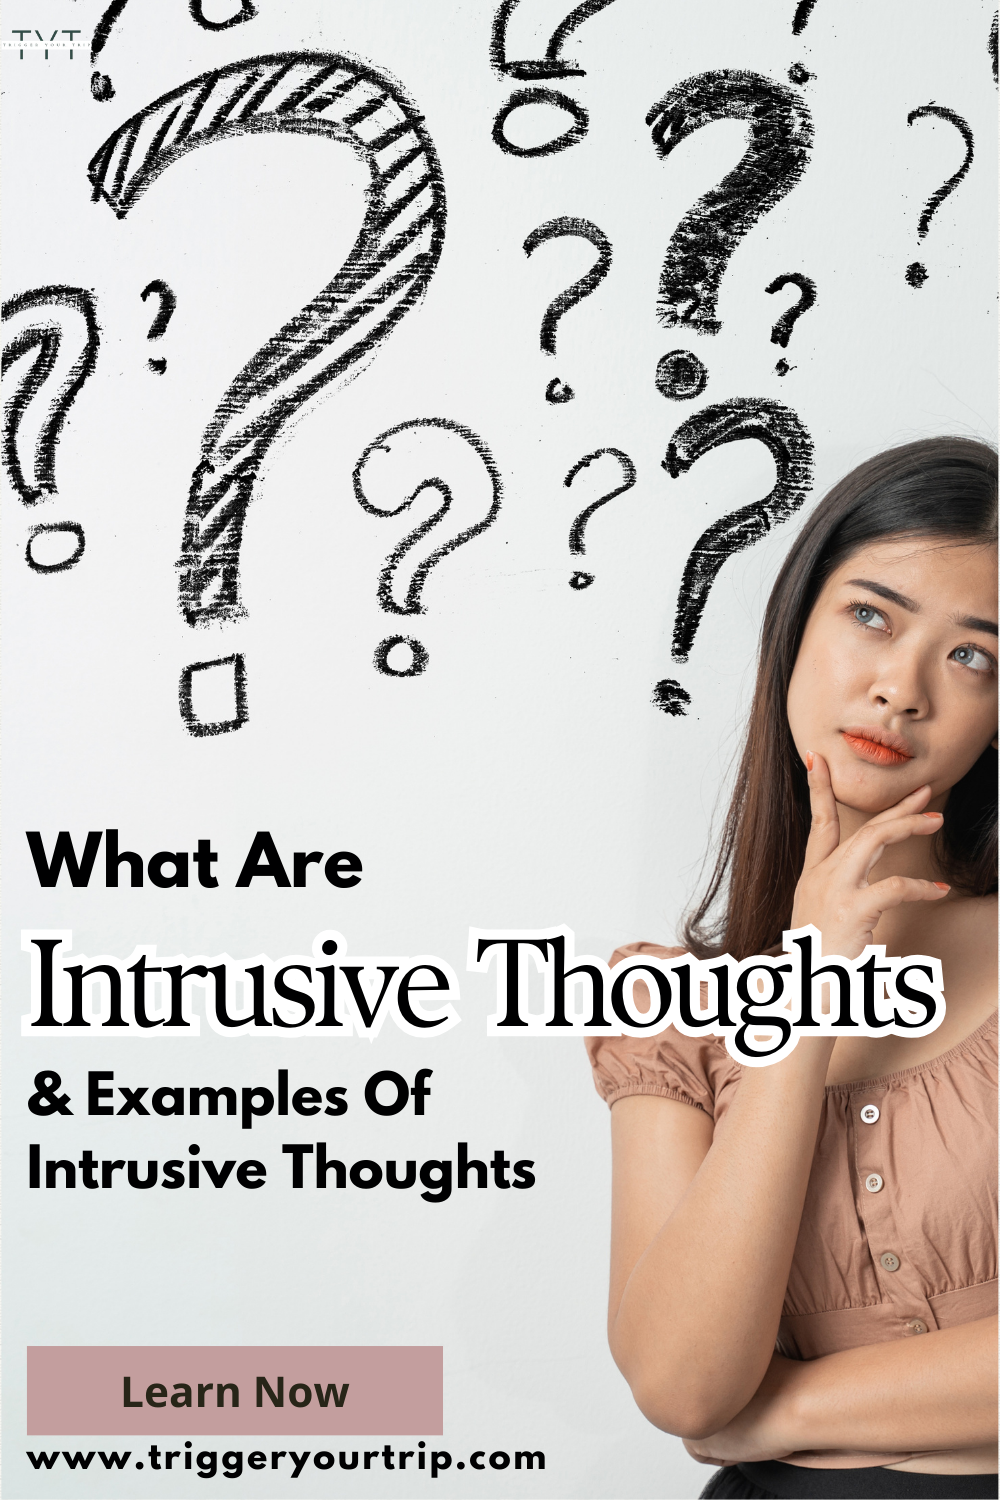 what are intrusive thoughts? examples of an intrusive thought